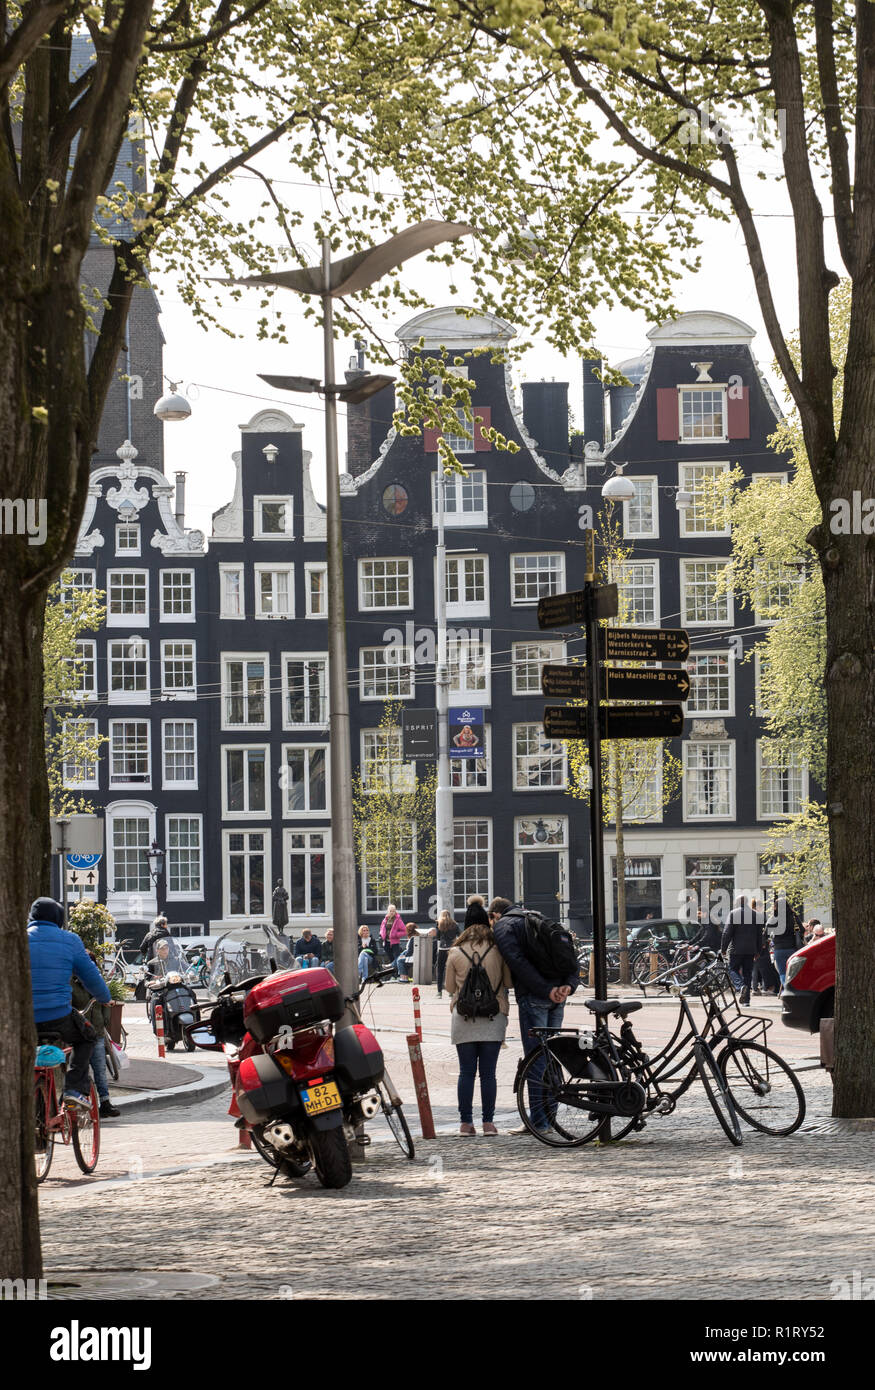 Amsterdam, Netherlands - April 20, 2017: Traditional historic Dutch gable houses l in Amsterdam The Netherlands Stock Photo